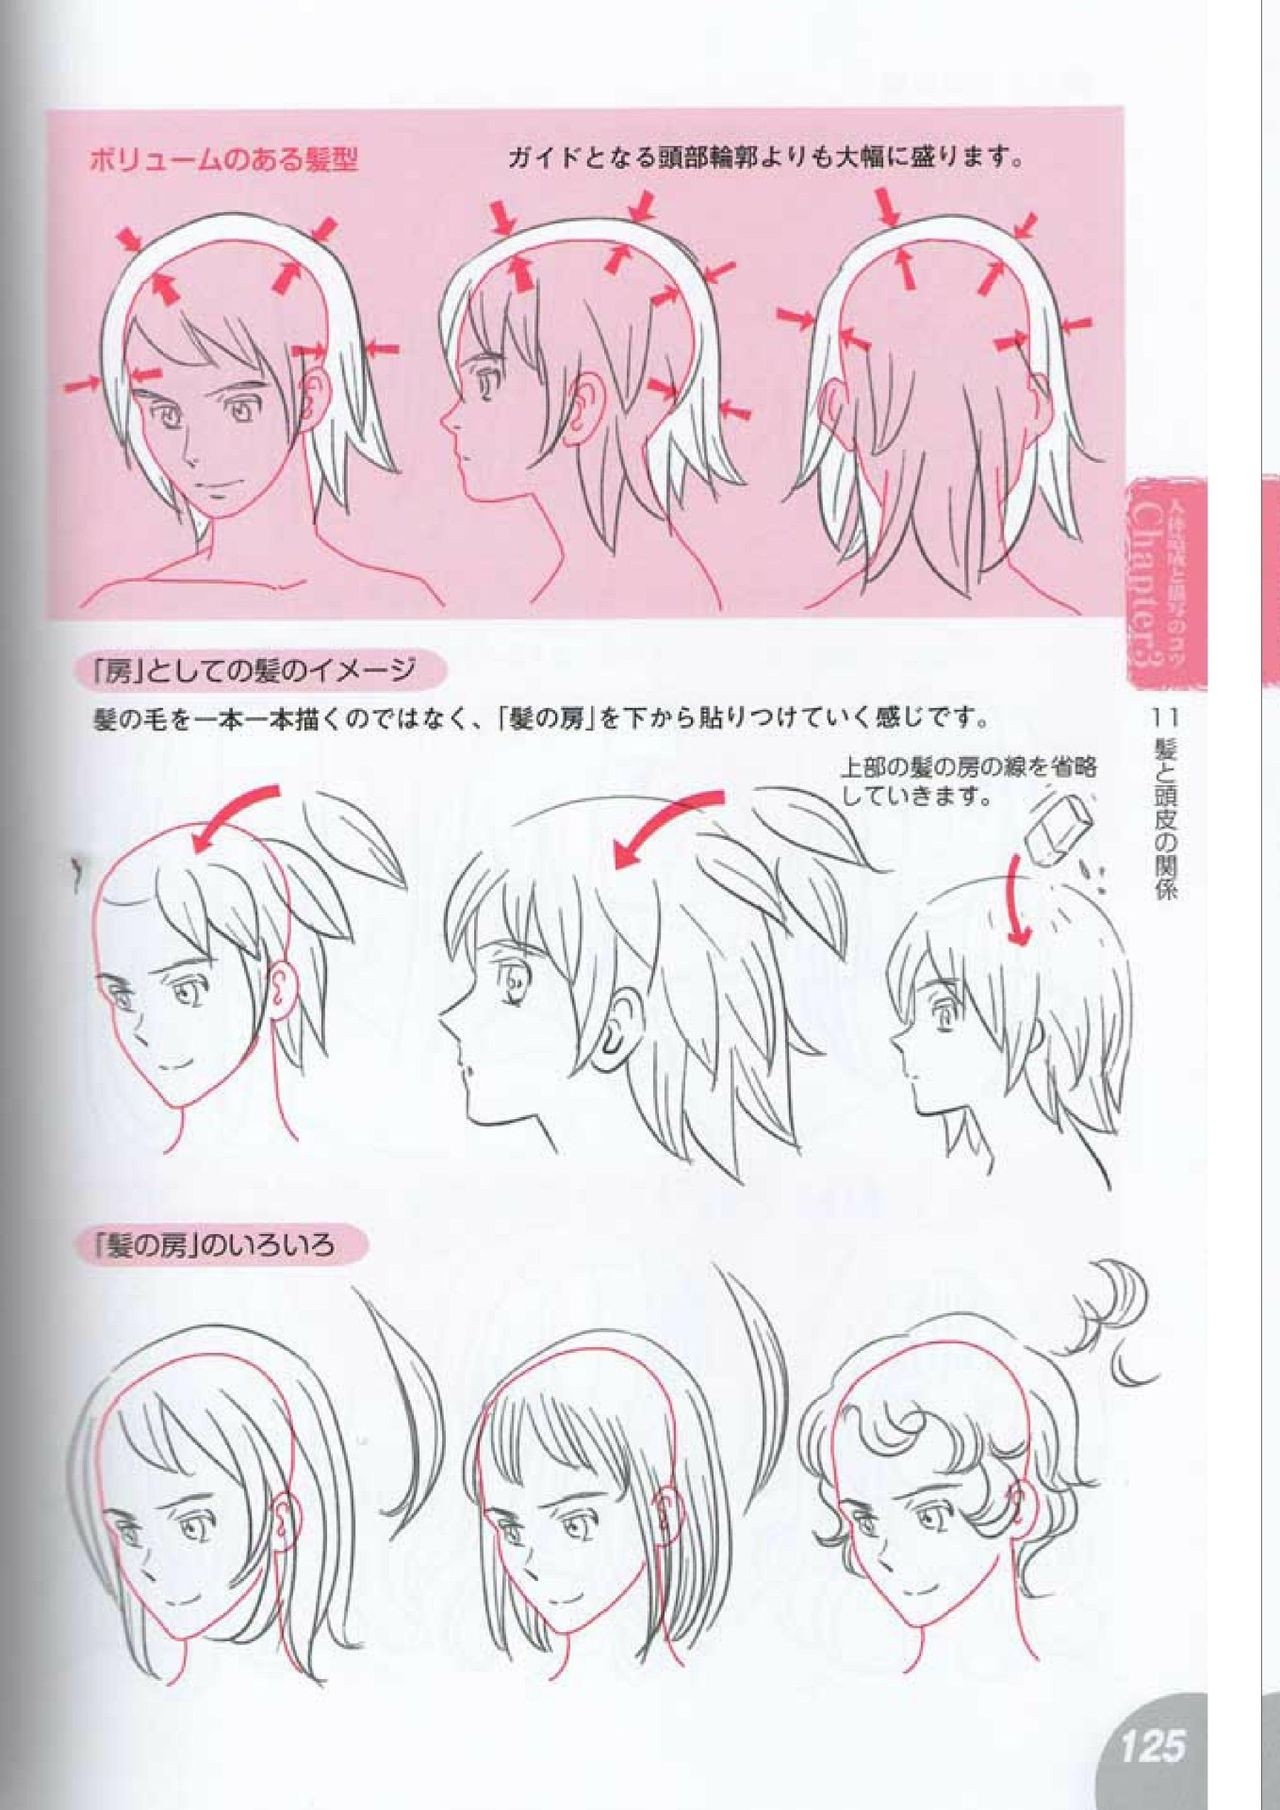 How to draw a character drawing from a human anatomical chart 123